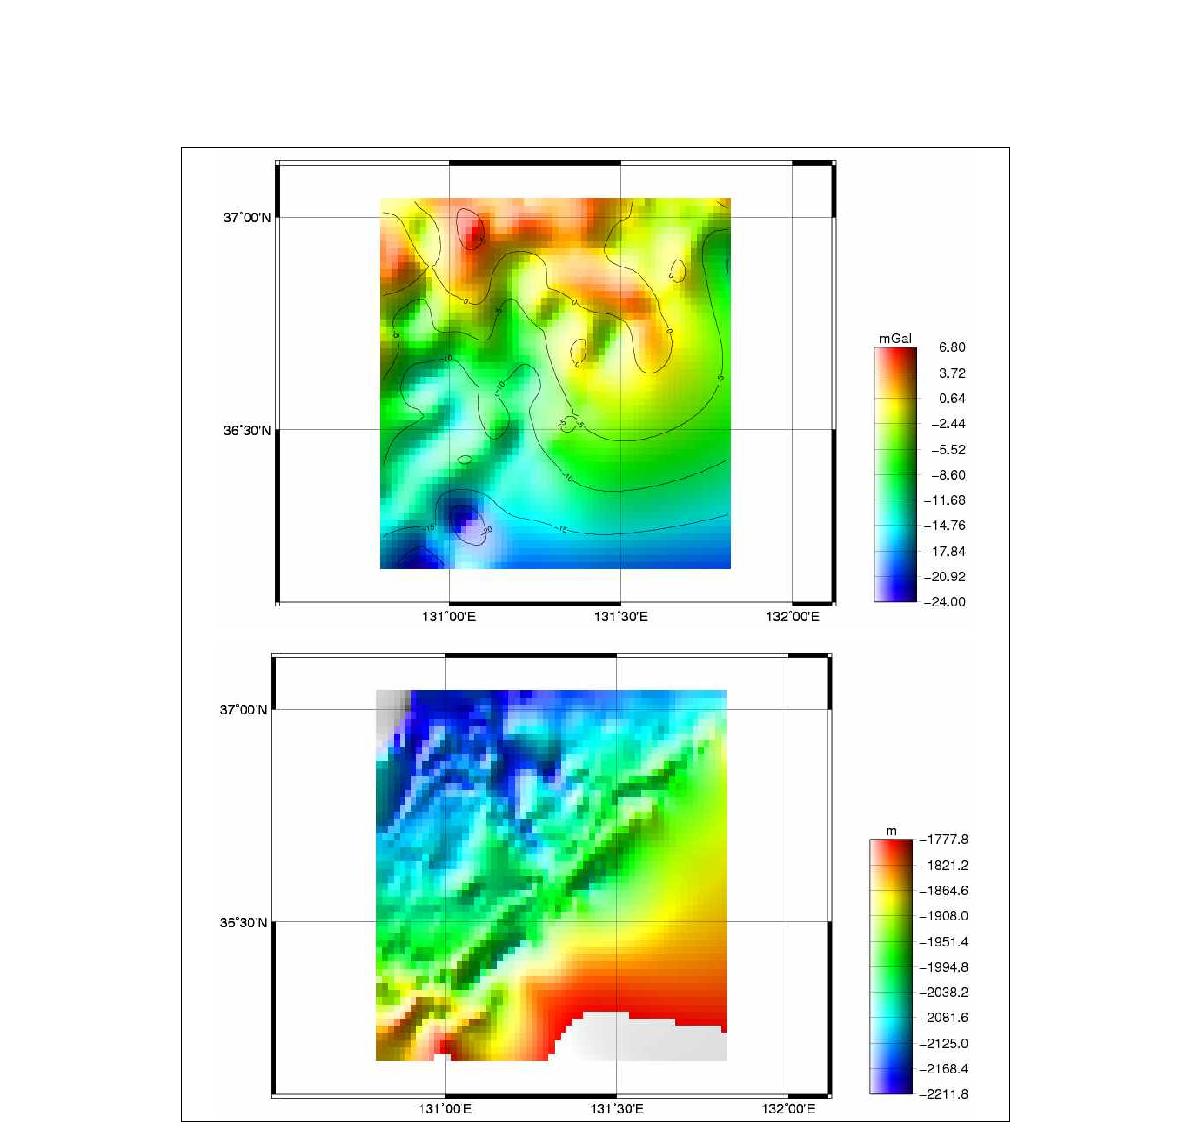 Altimeter satellite freeair anomaly (up) and bathymetry (down).